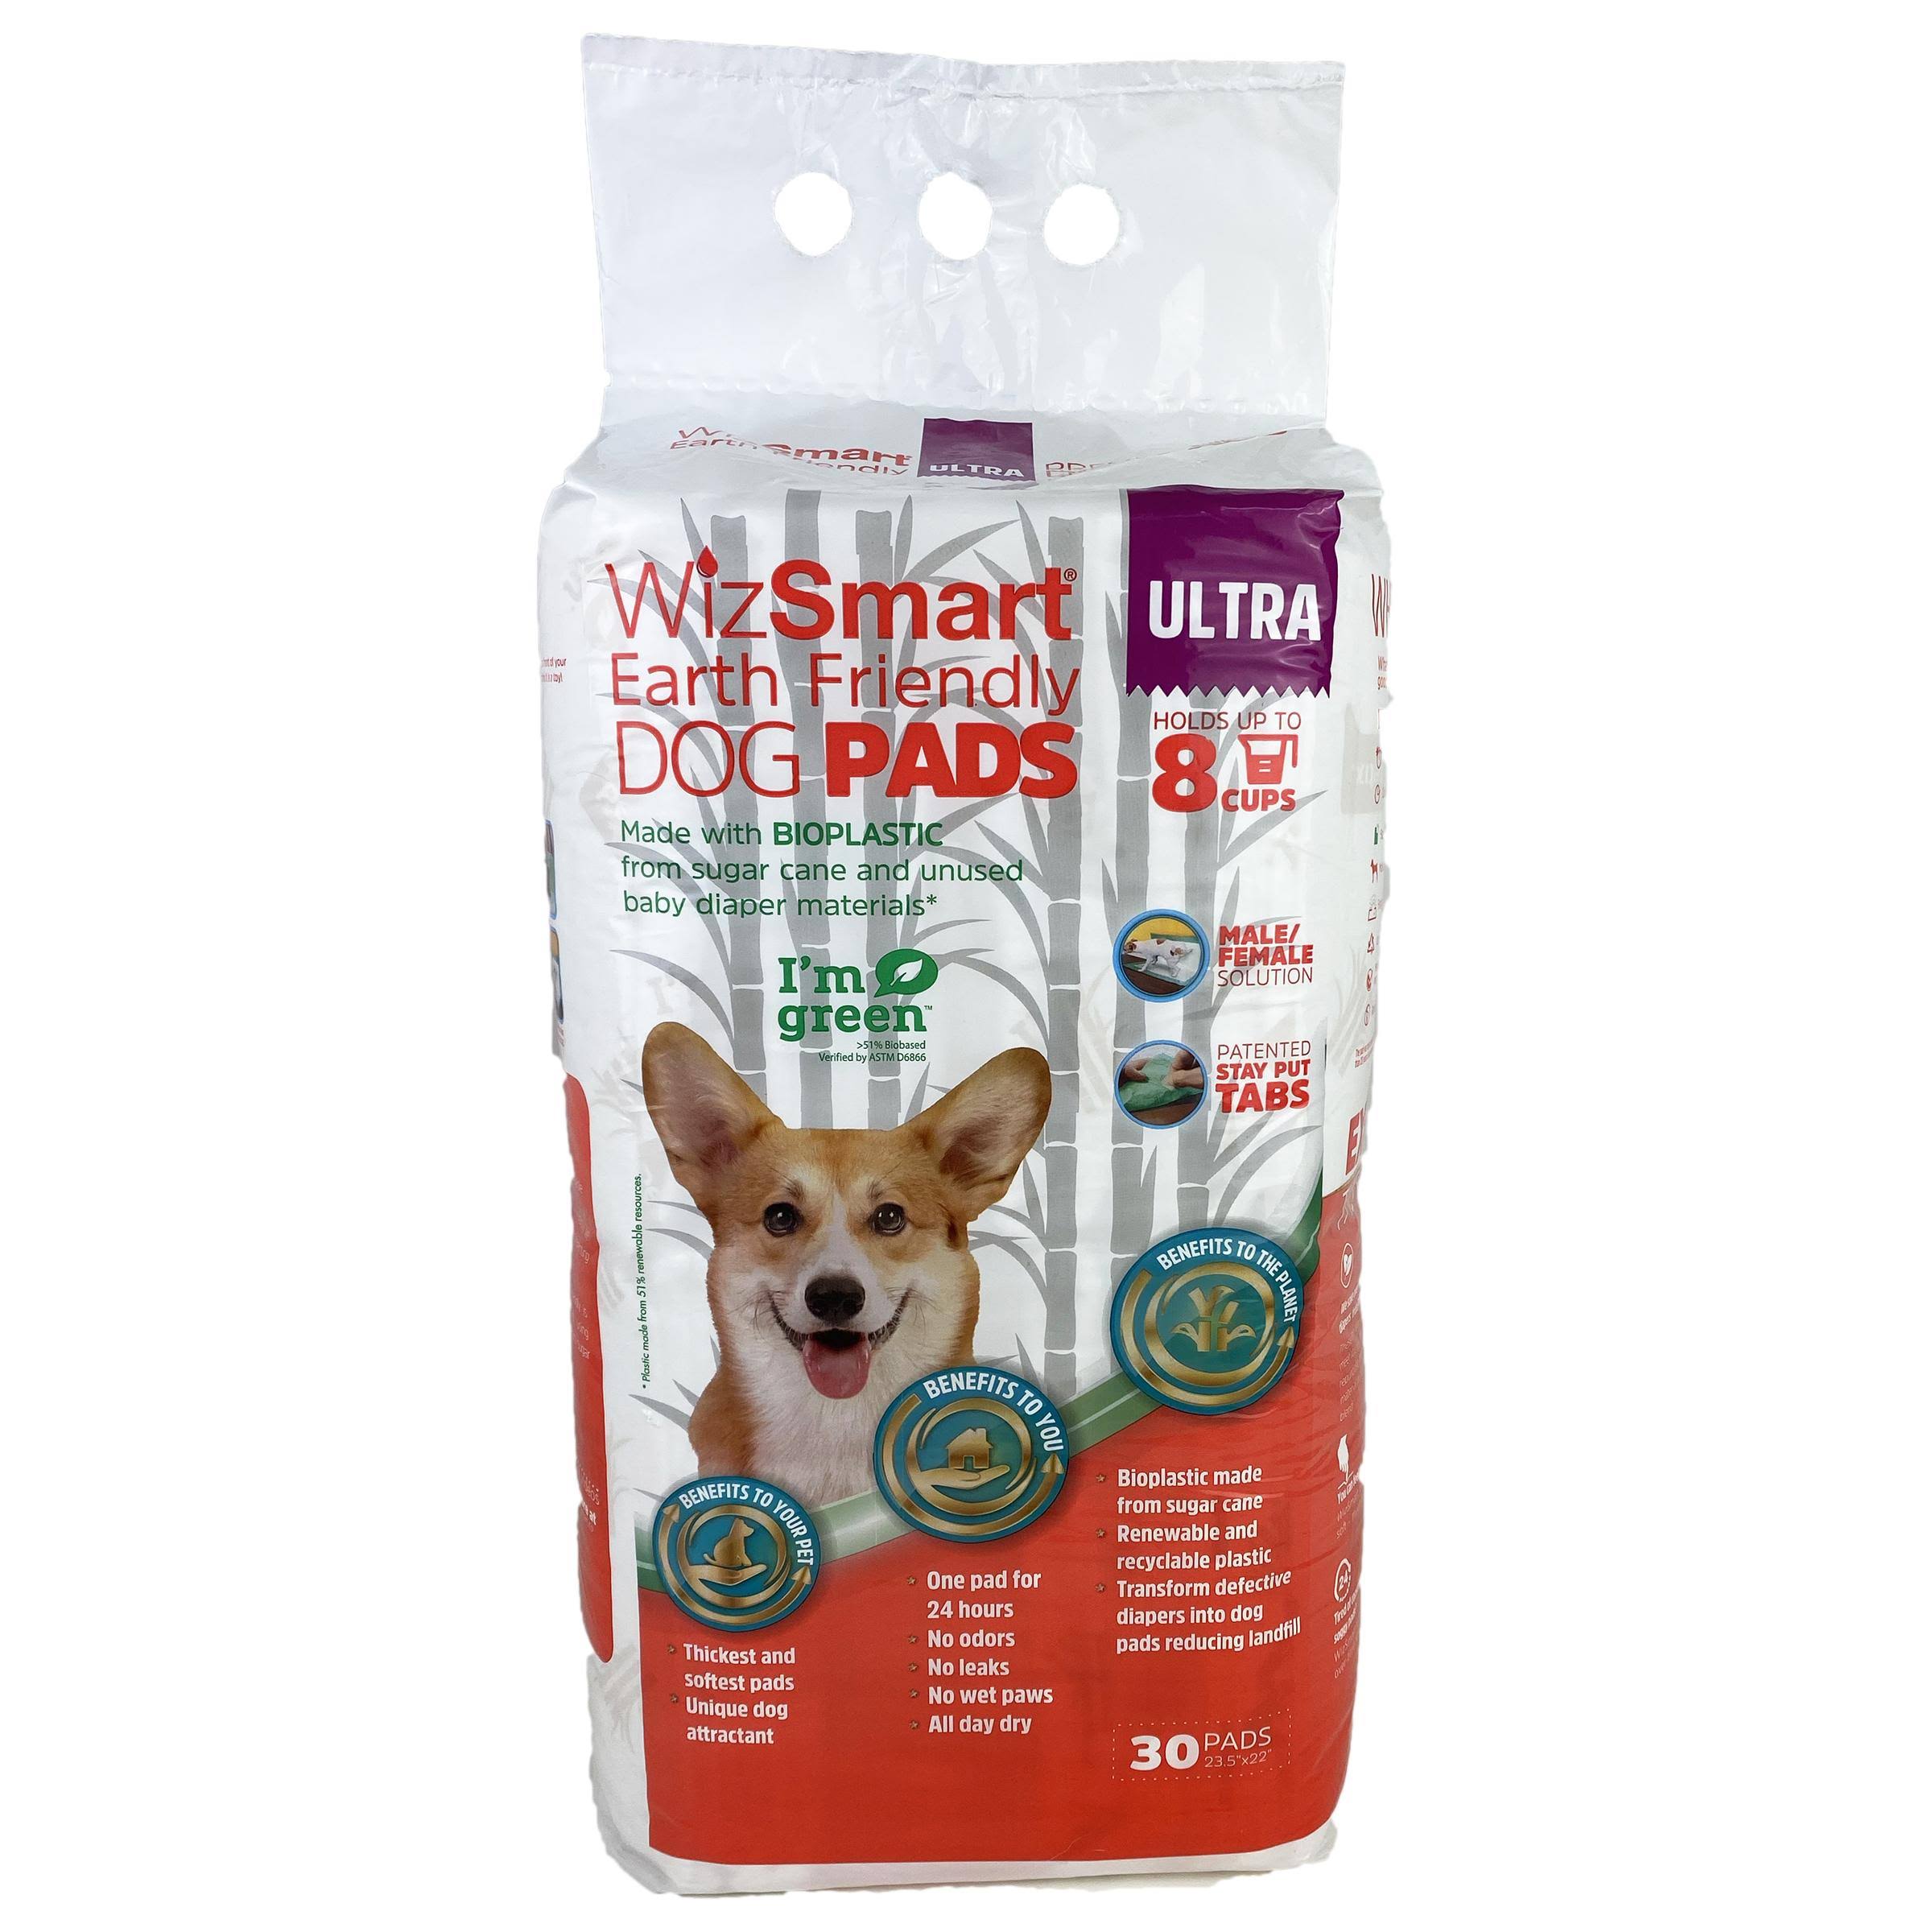 WizSmart Earth Friendly Dog Pads Ultra 30 Count